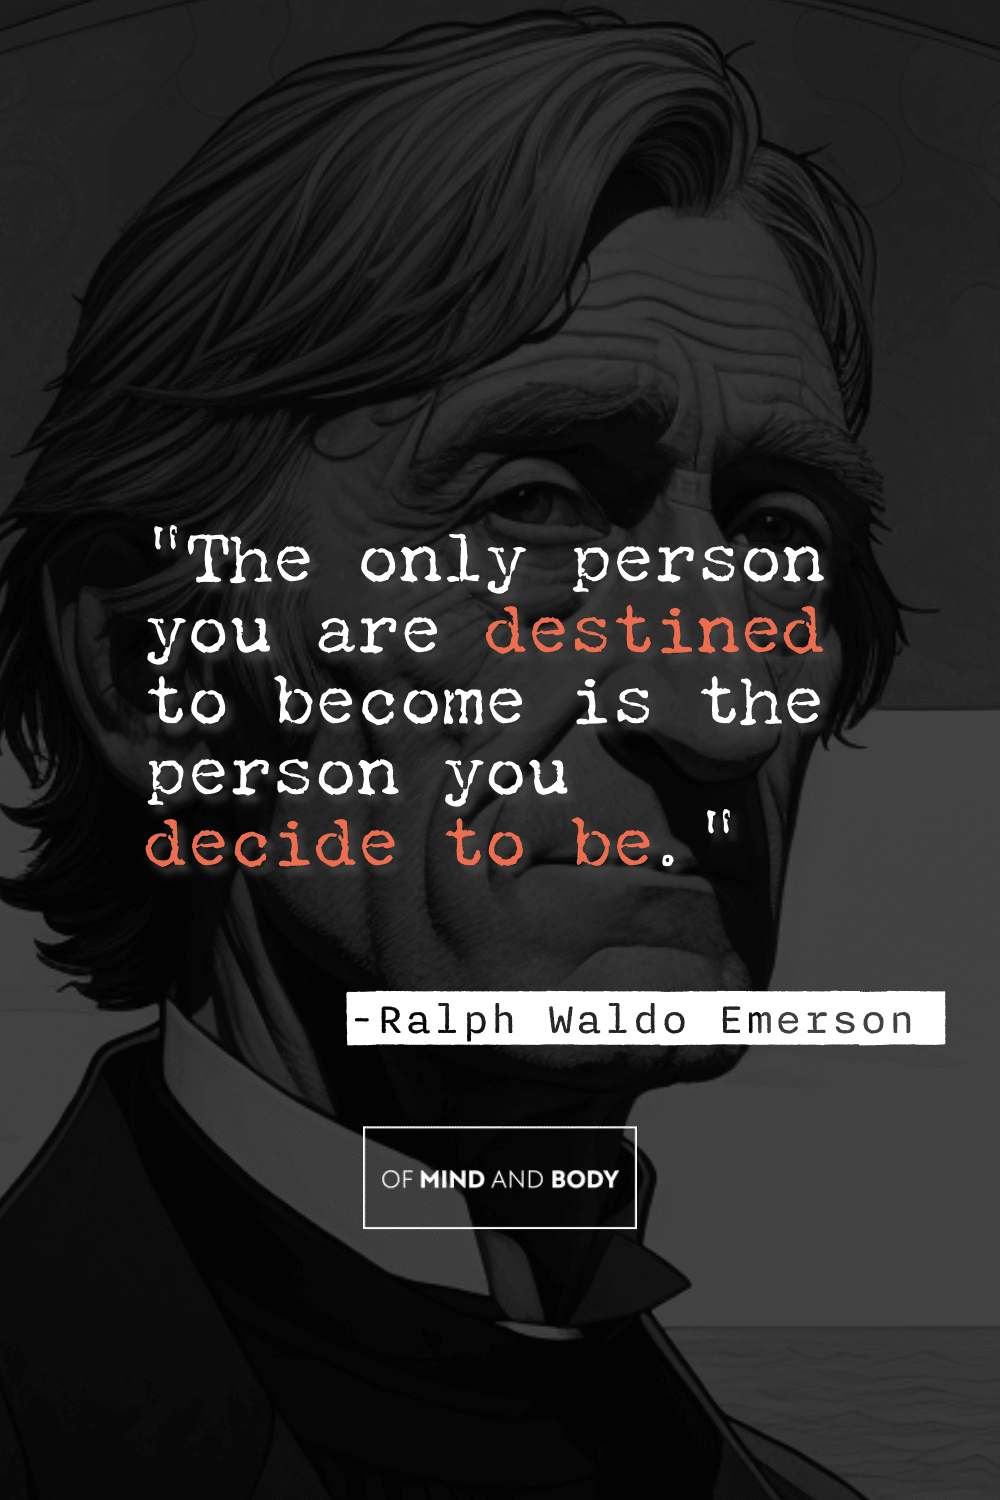 Quotes on Self Improvement - "The only person you are destined to become is the person you decide to be.